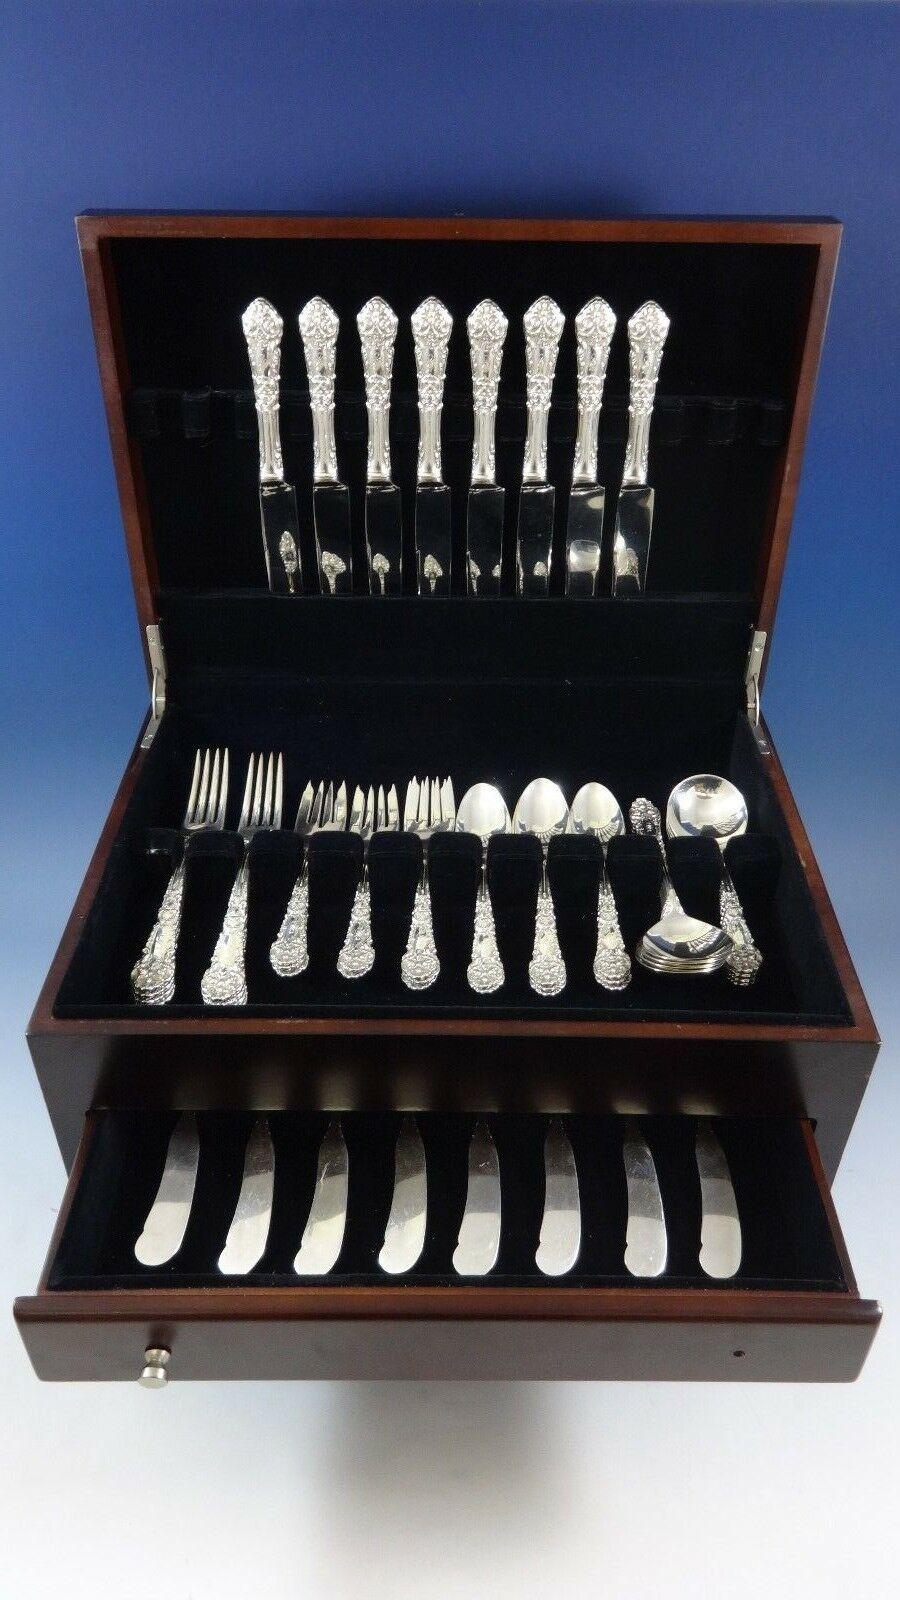 Beautiful French Renaissance by Reed & Barton sterling silver flatware set - 48 pieces. This set includes:

8 knives, 9